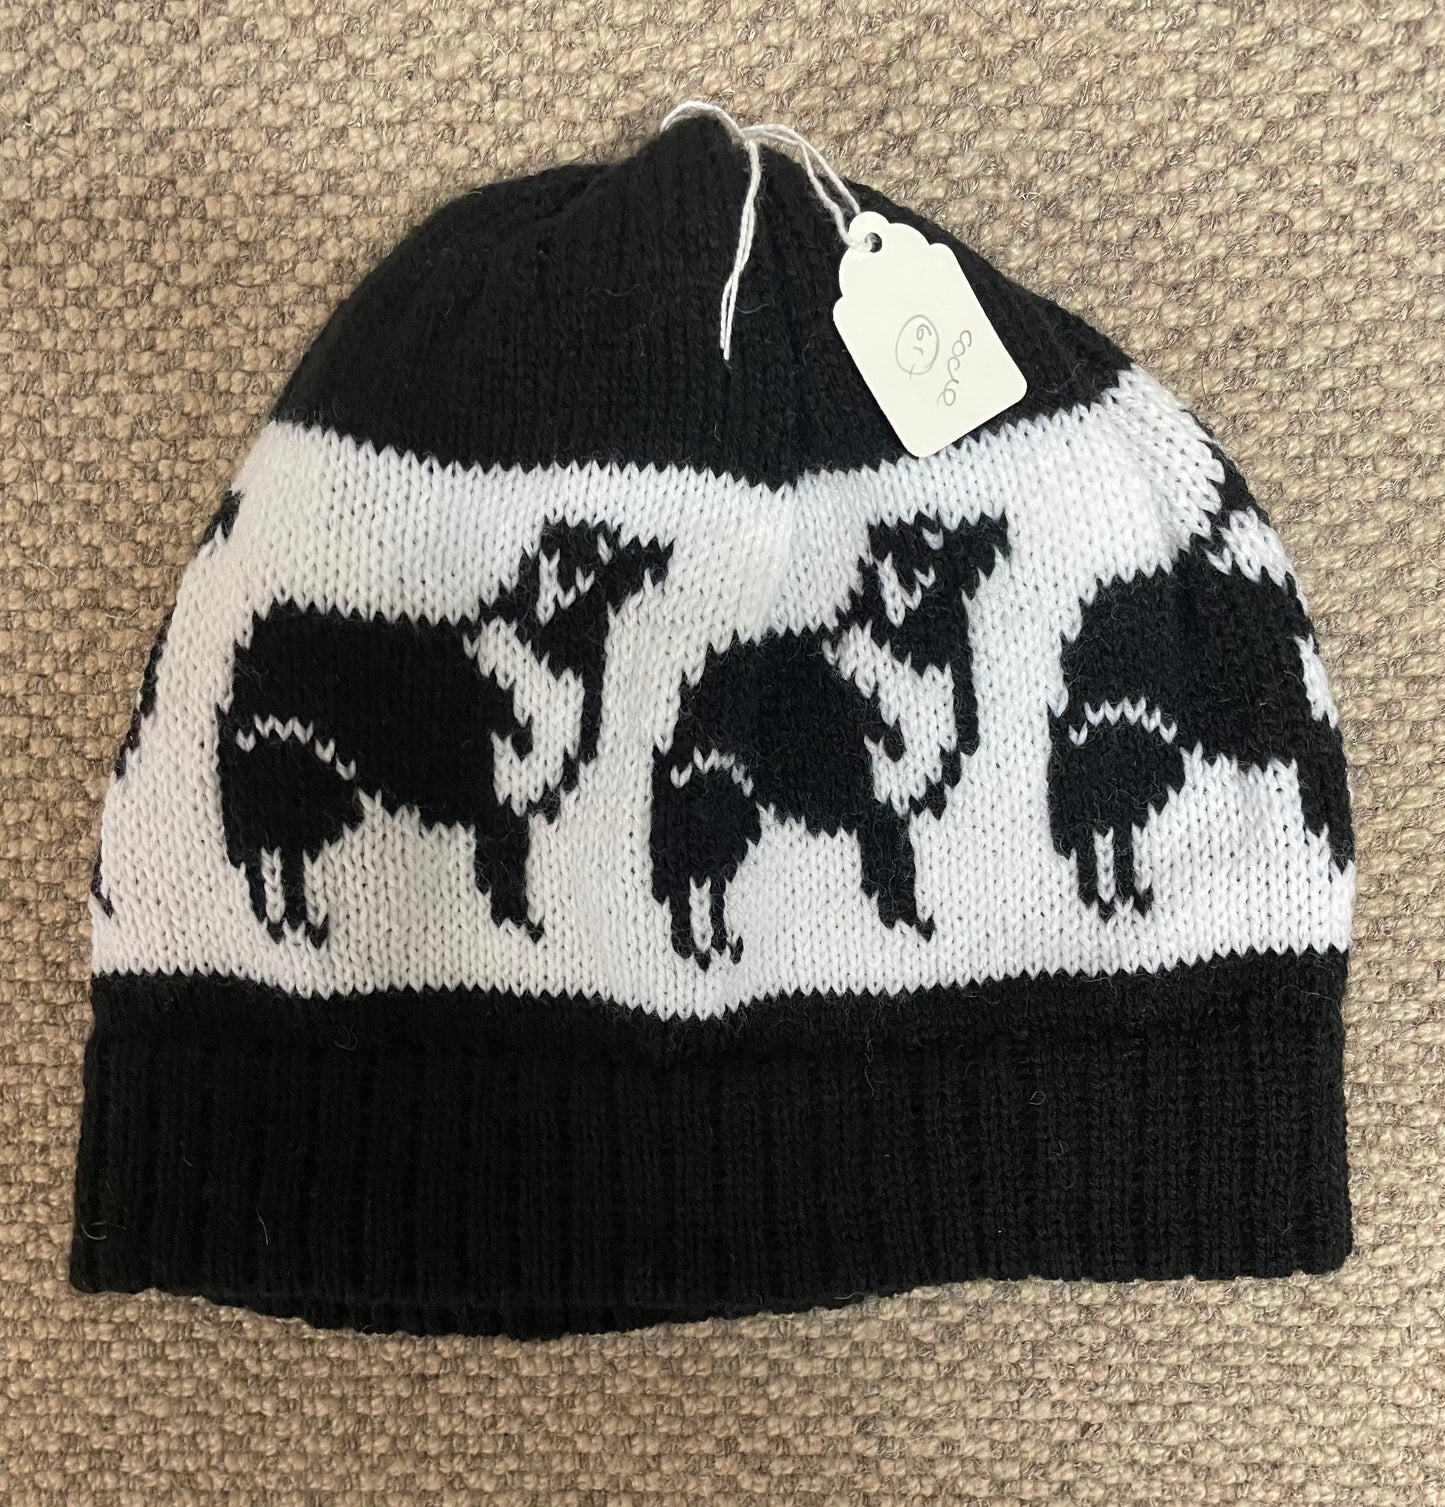 Black and white Sheep designed Woollen hat